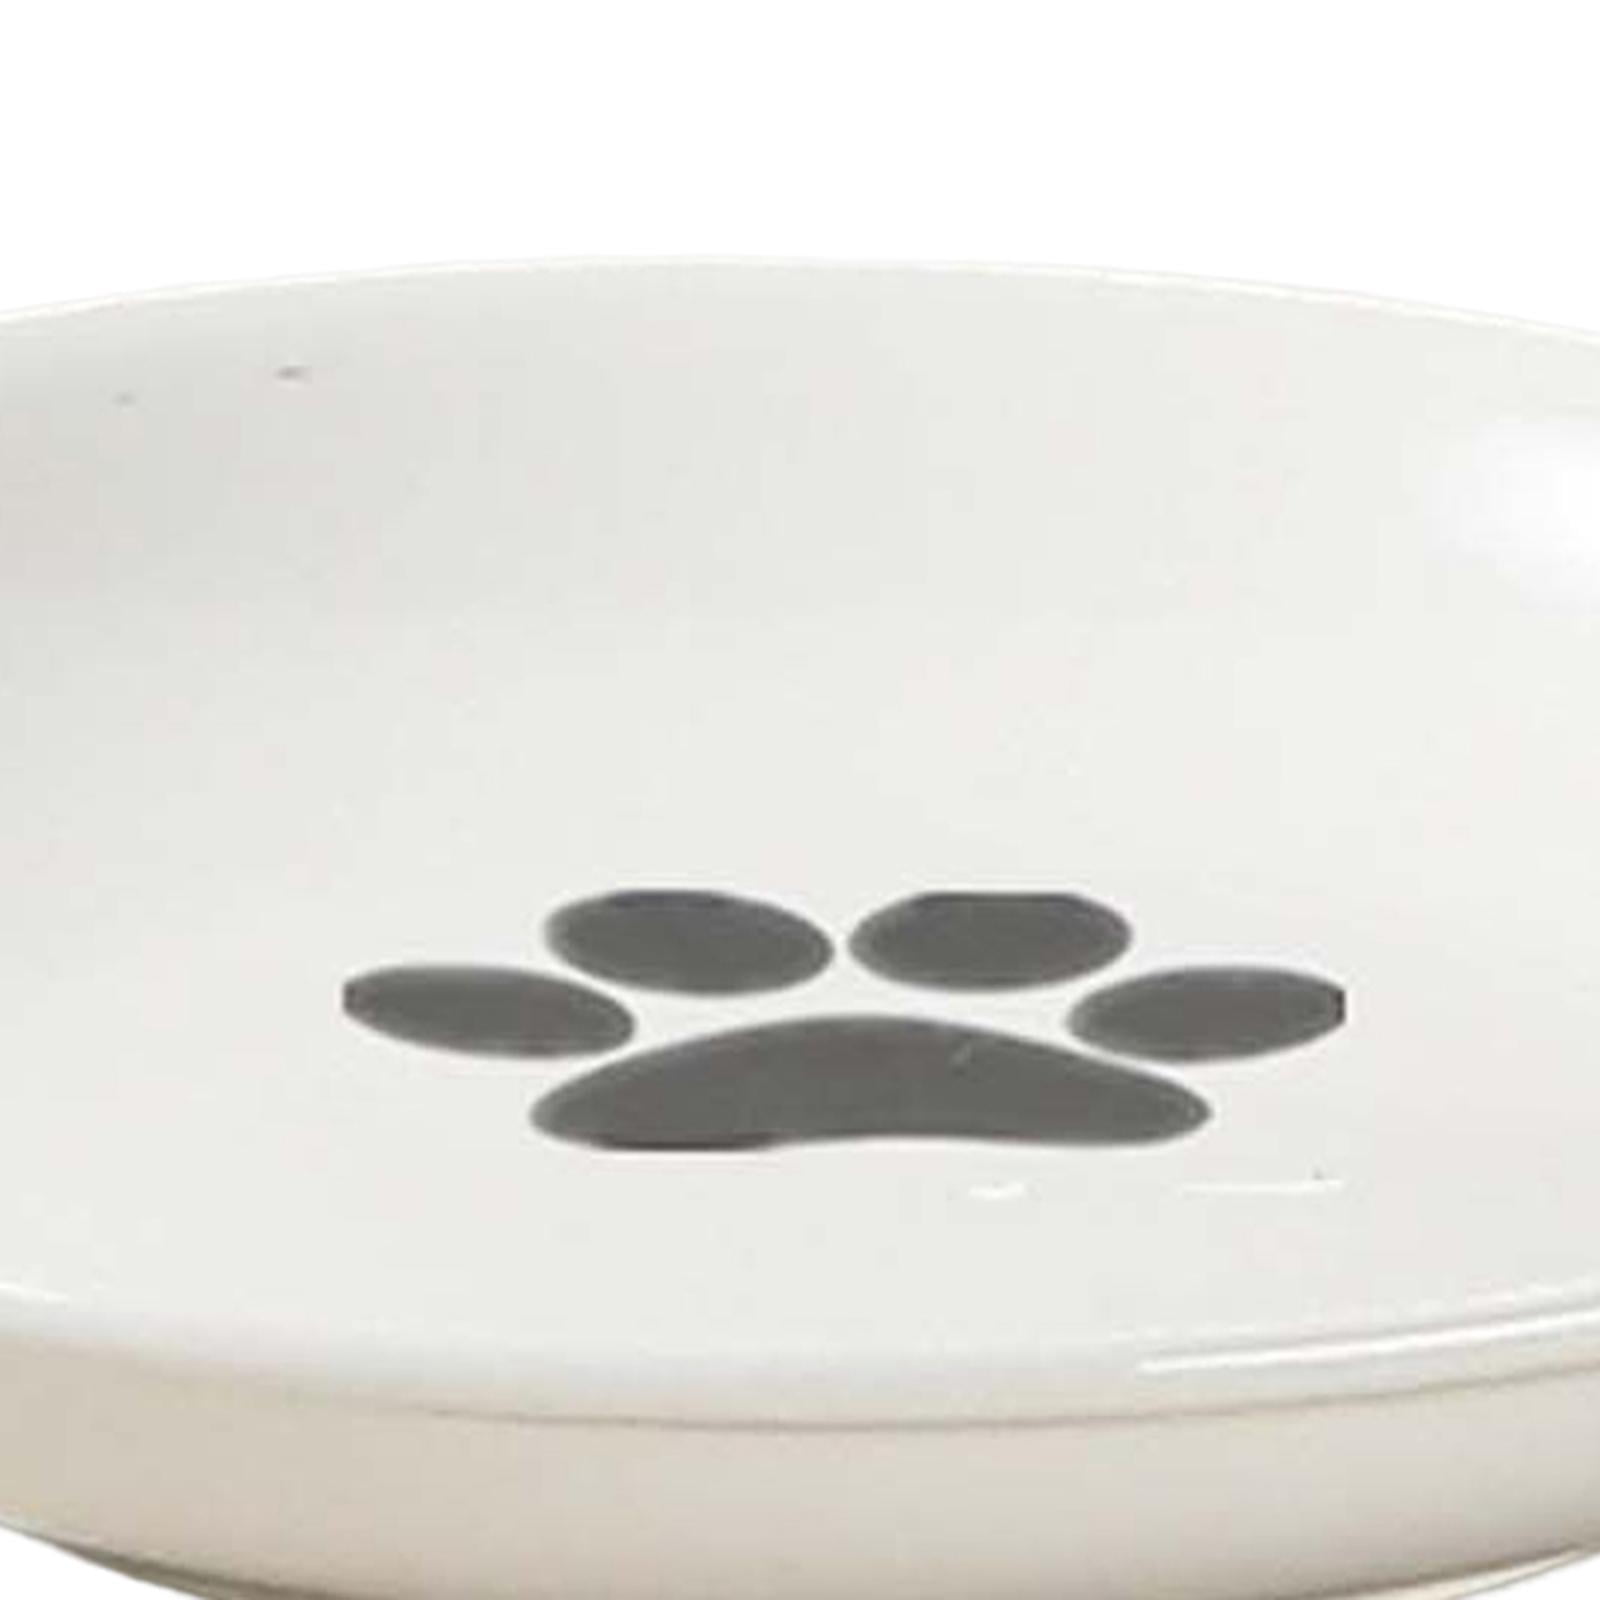 Lkeiyay Elevated Cat Bowls - Raised Tilted Ceramic Cat Food Bowls for  Indoor Cats,Ergonomic Cat Feeding Bowls with Clear Acrylic Stand